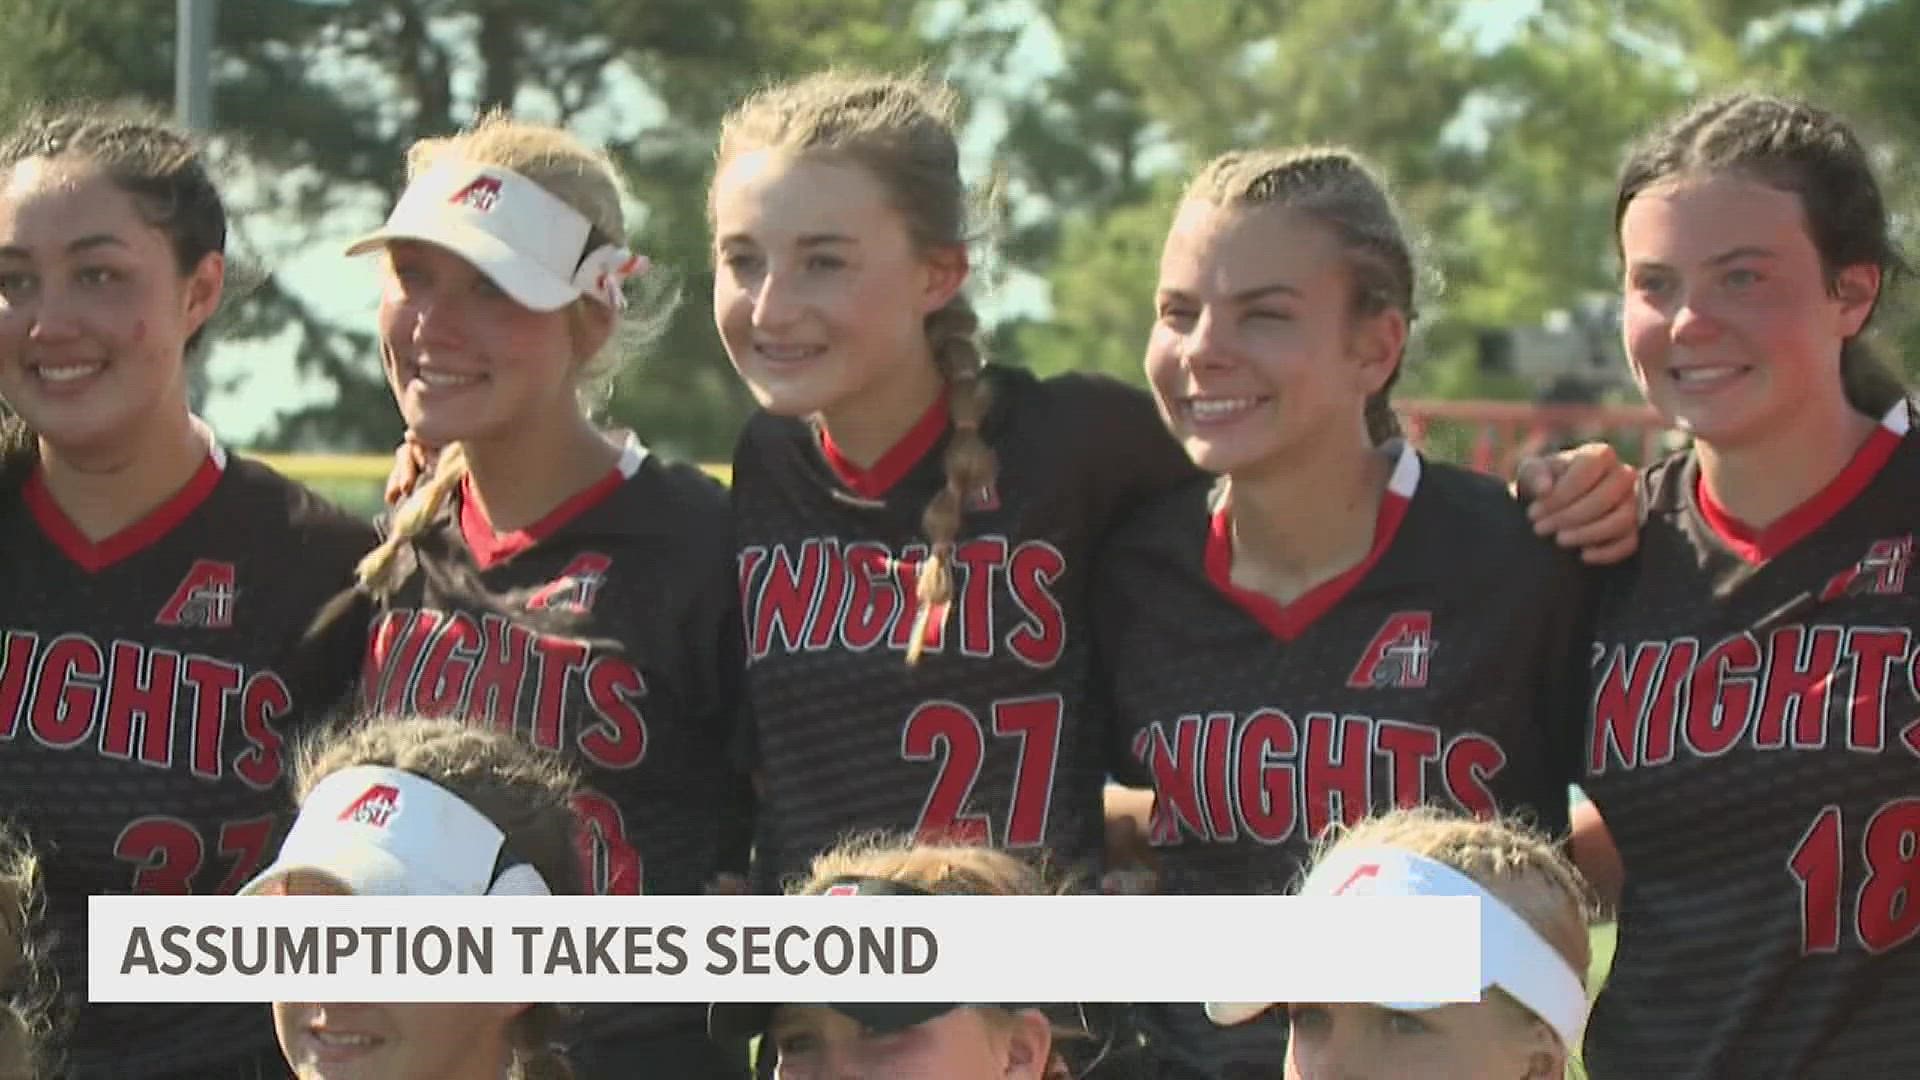 Mount Vernon avenged last year's loss with a 10-5 victory over Assumption at the State finals.